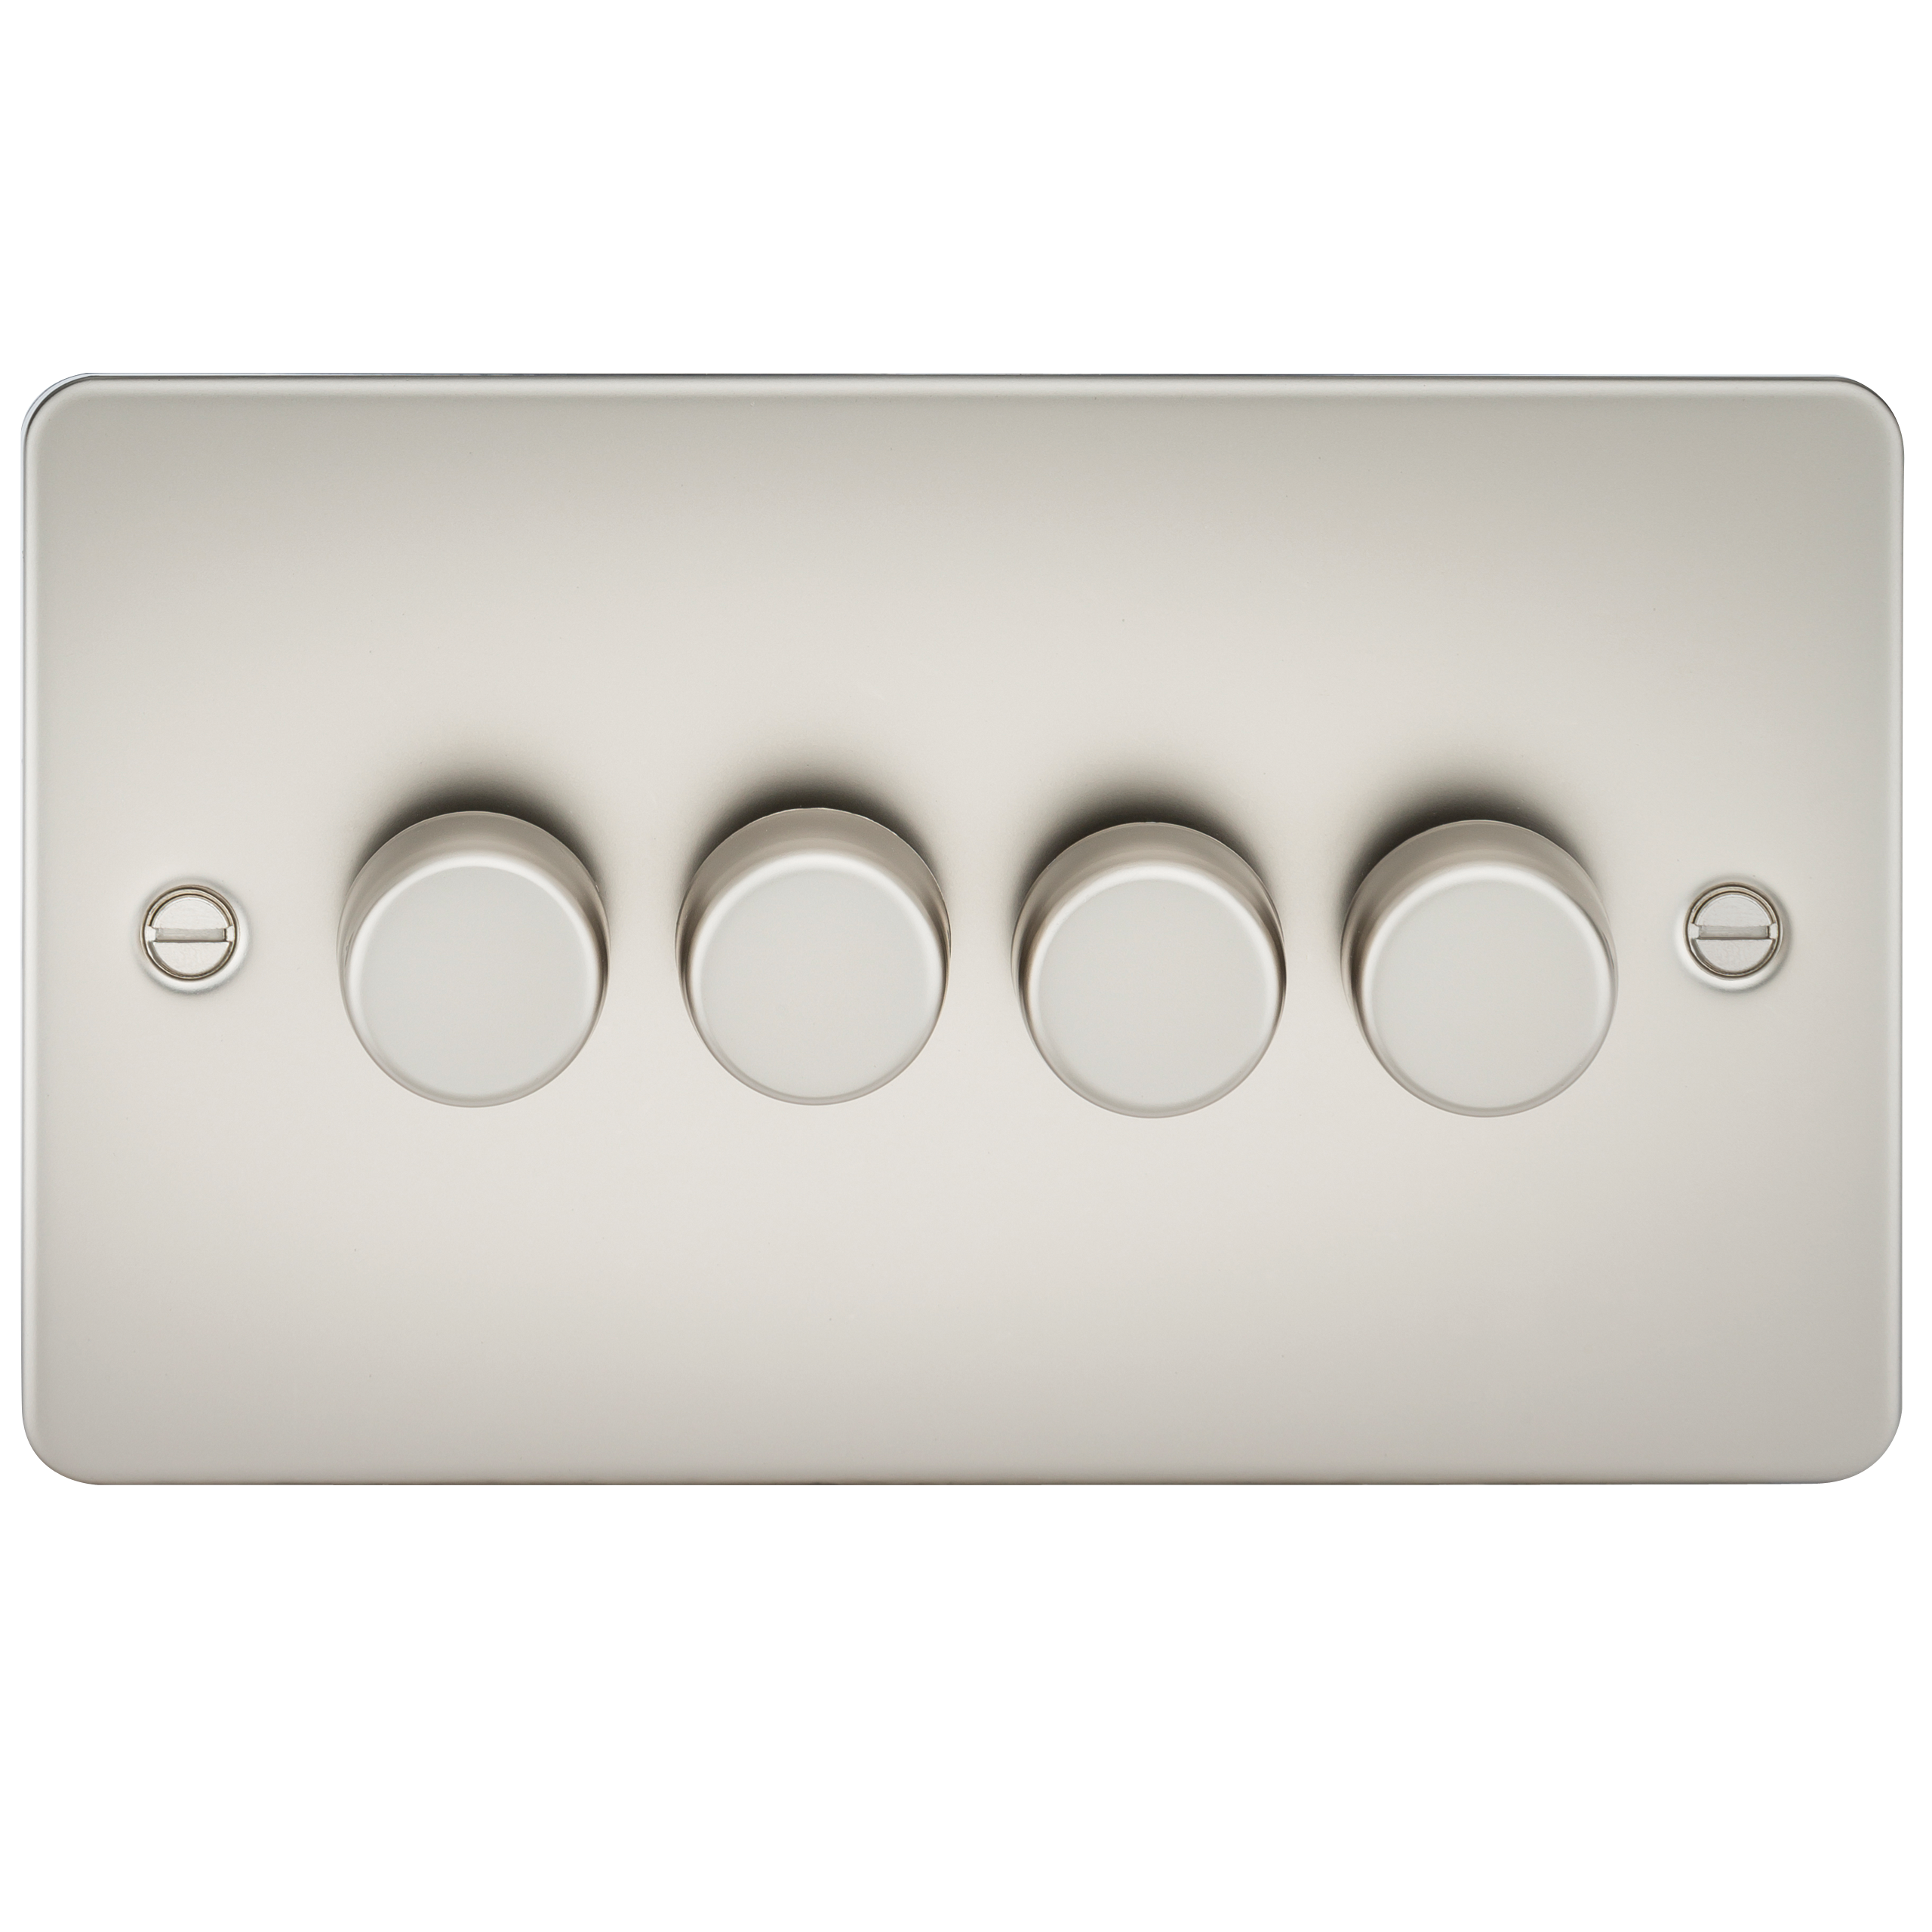 FLAT PLATE 4G 2 WAY 40-400W DIMMER - PEARL - FP2174PL 